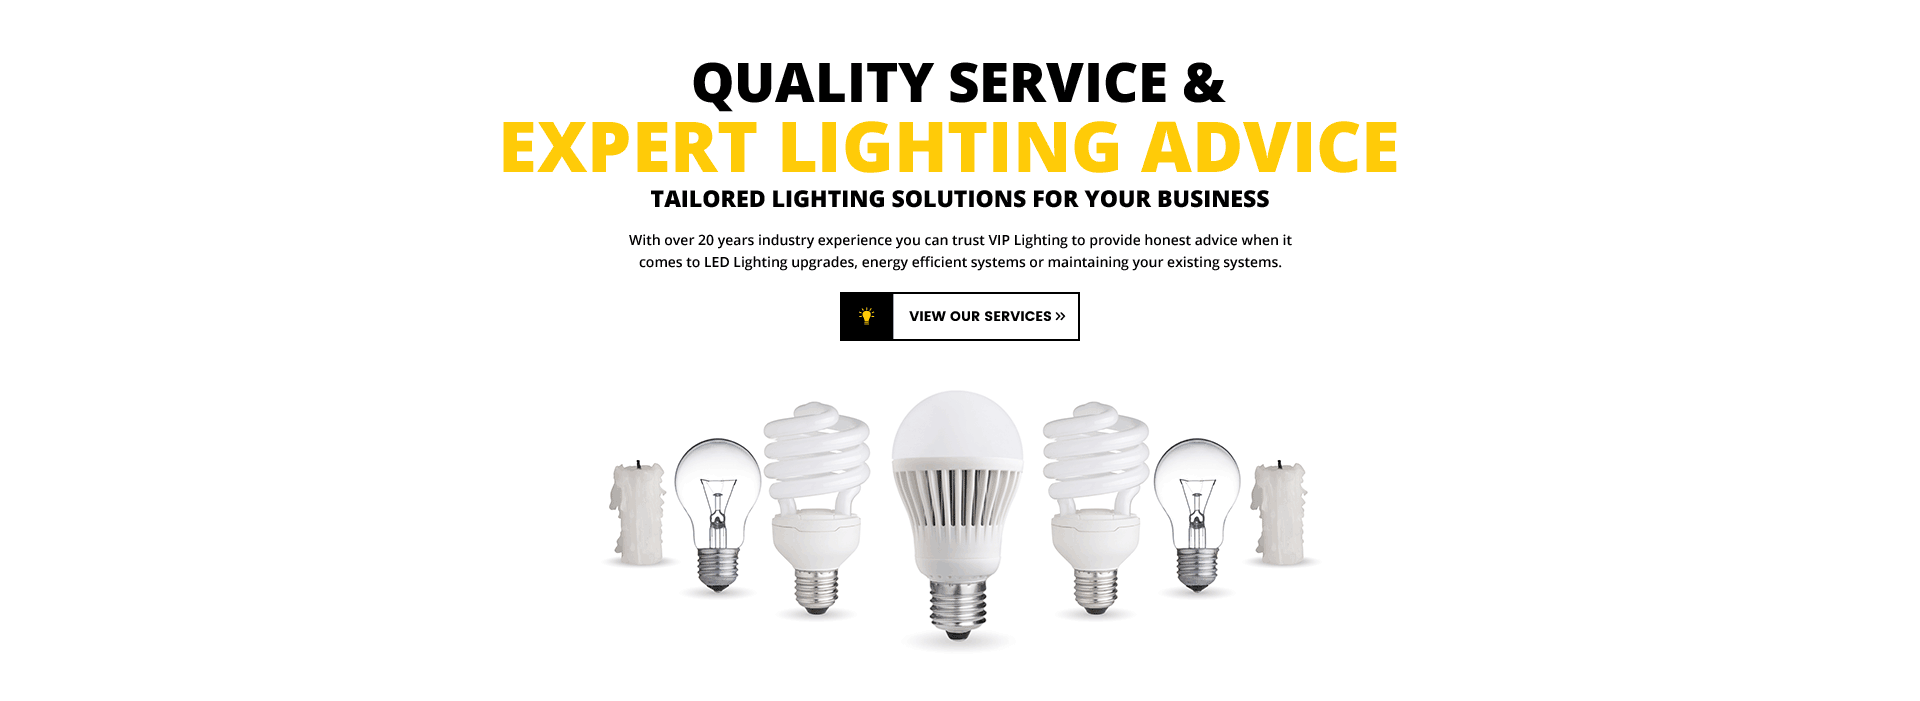 Quality Service and Expert Lighting Advice